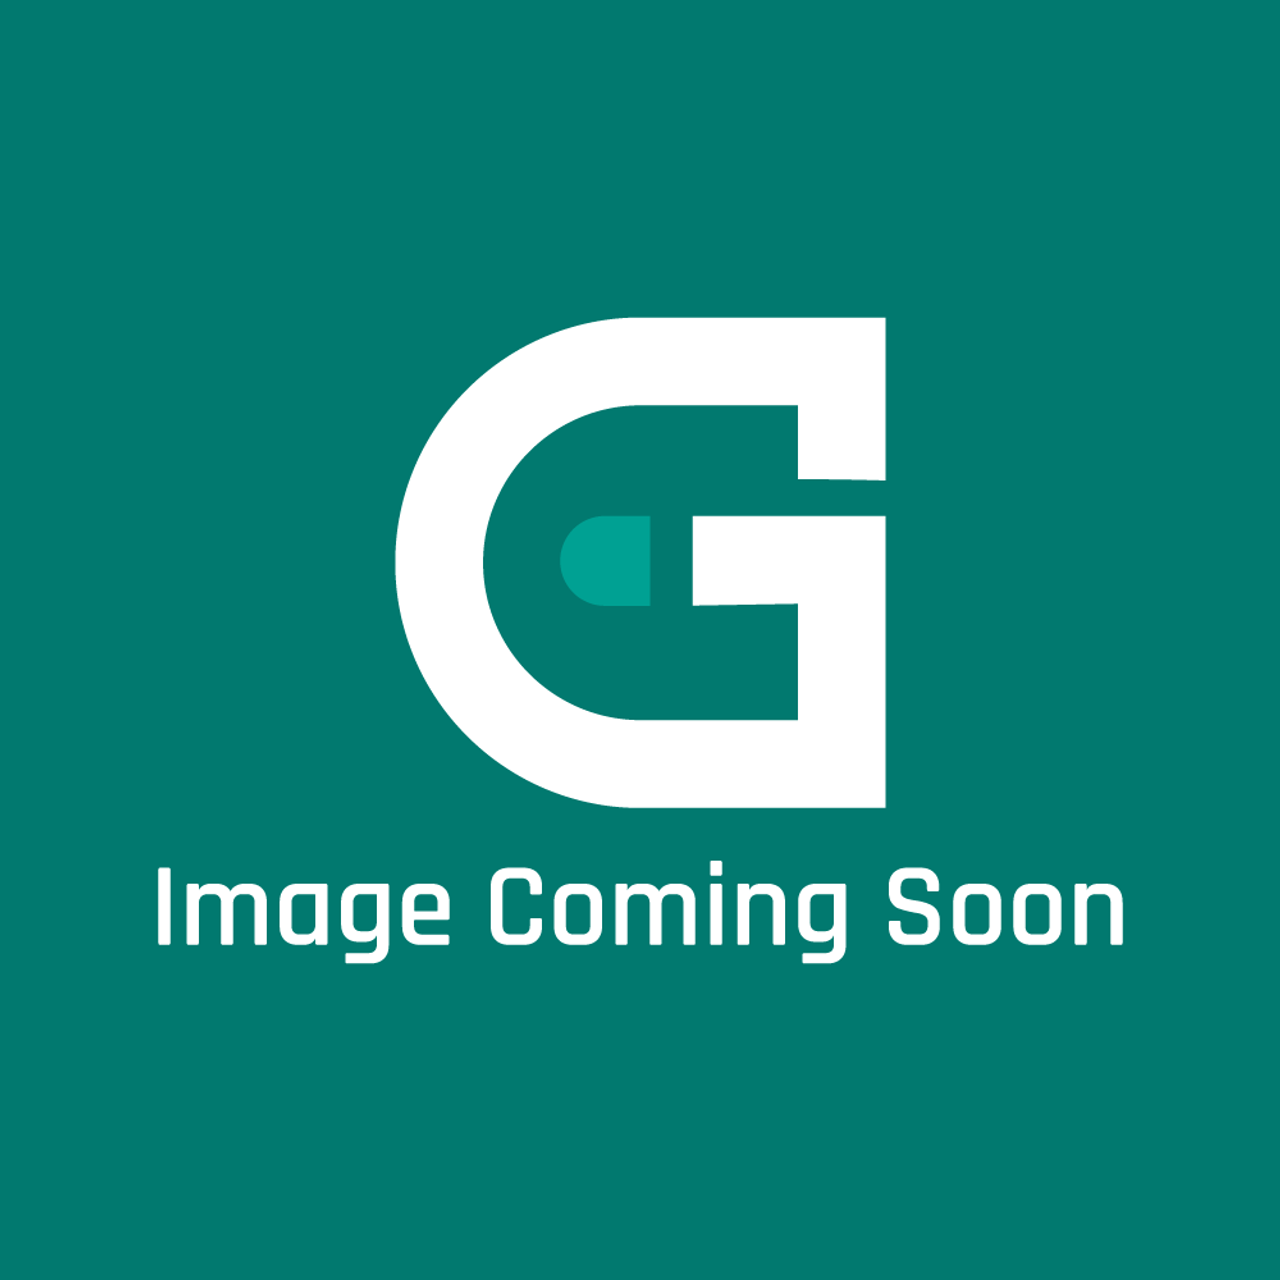 Frigidaire - Electrolux 5304499393 - Grate - Image Coming Soon!